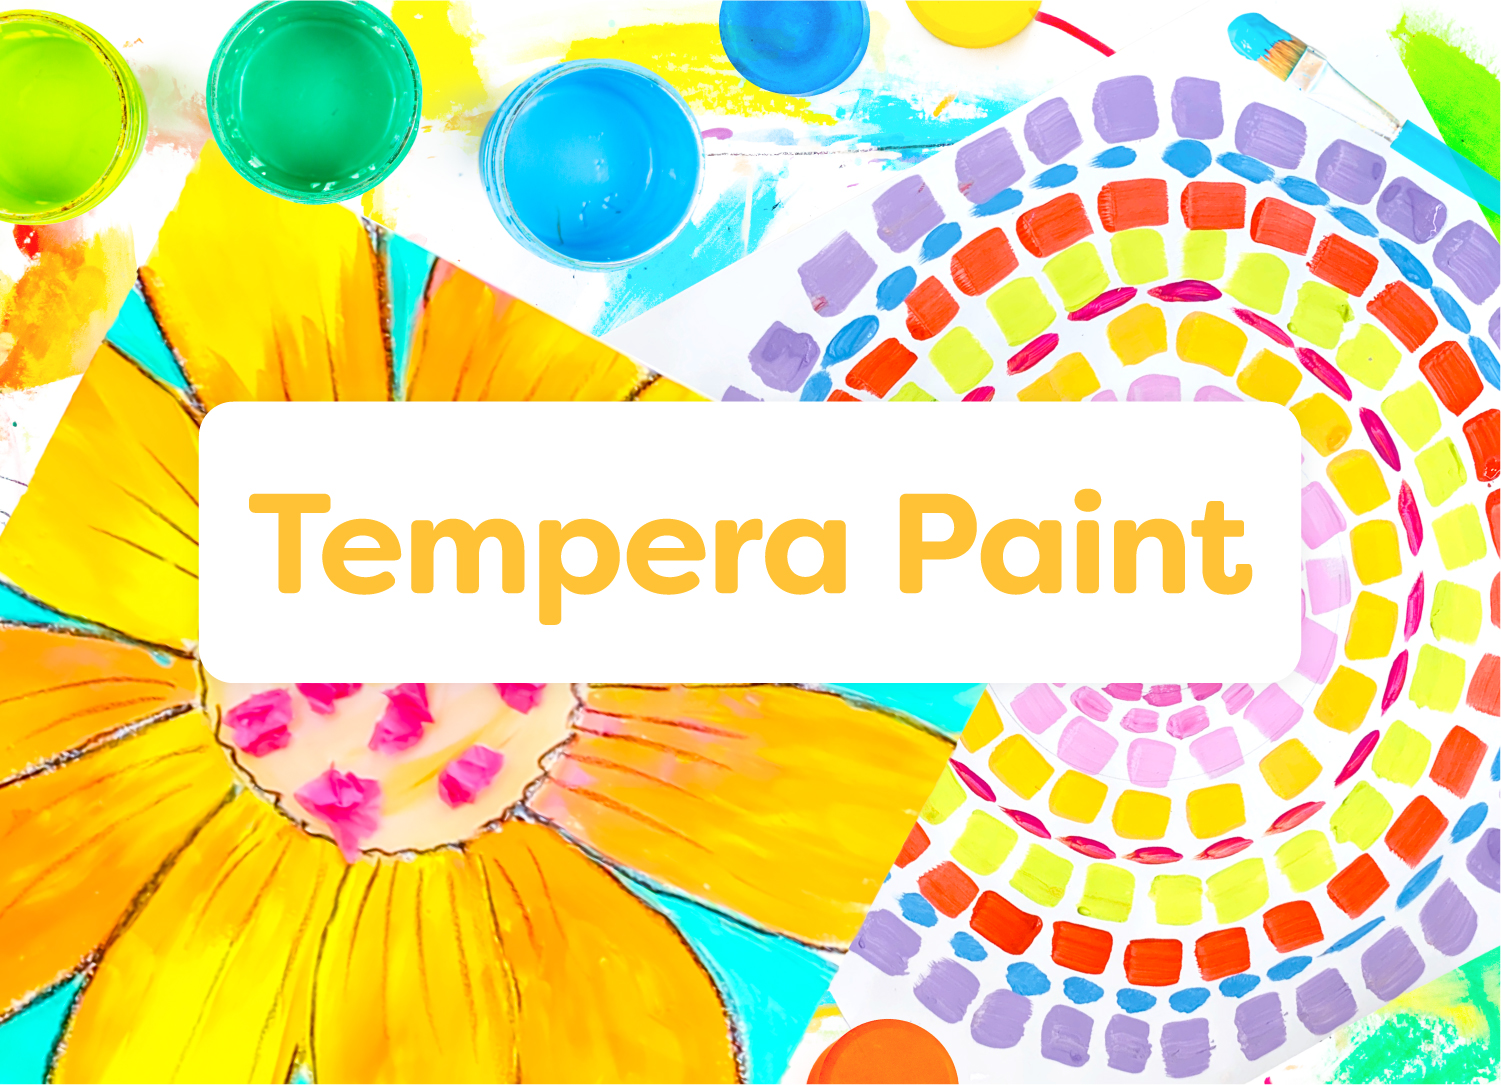 Tempera Paints; art lessons for kids by category